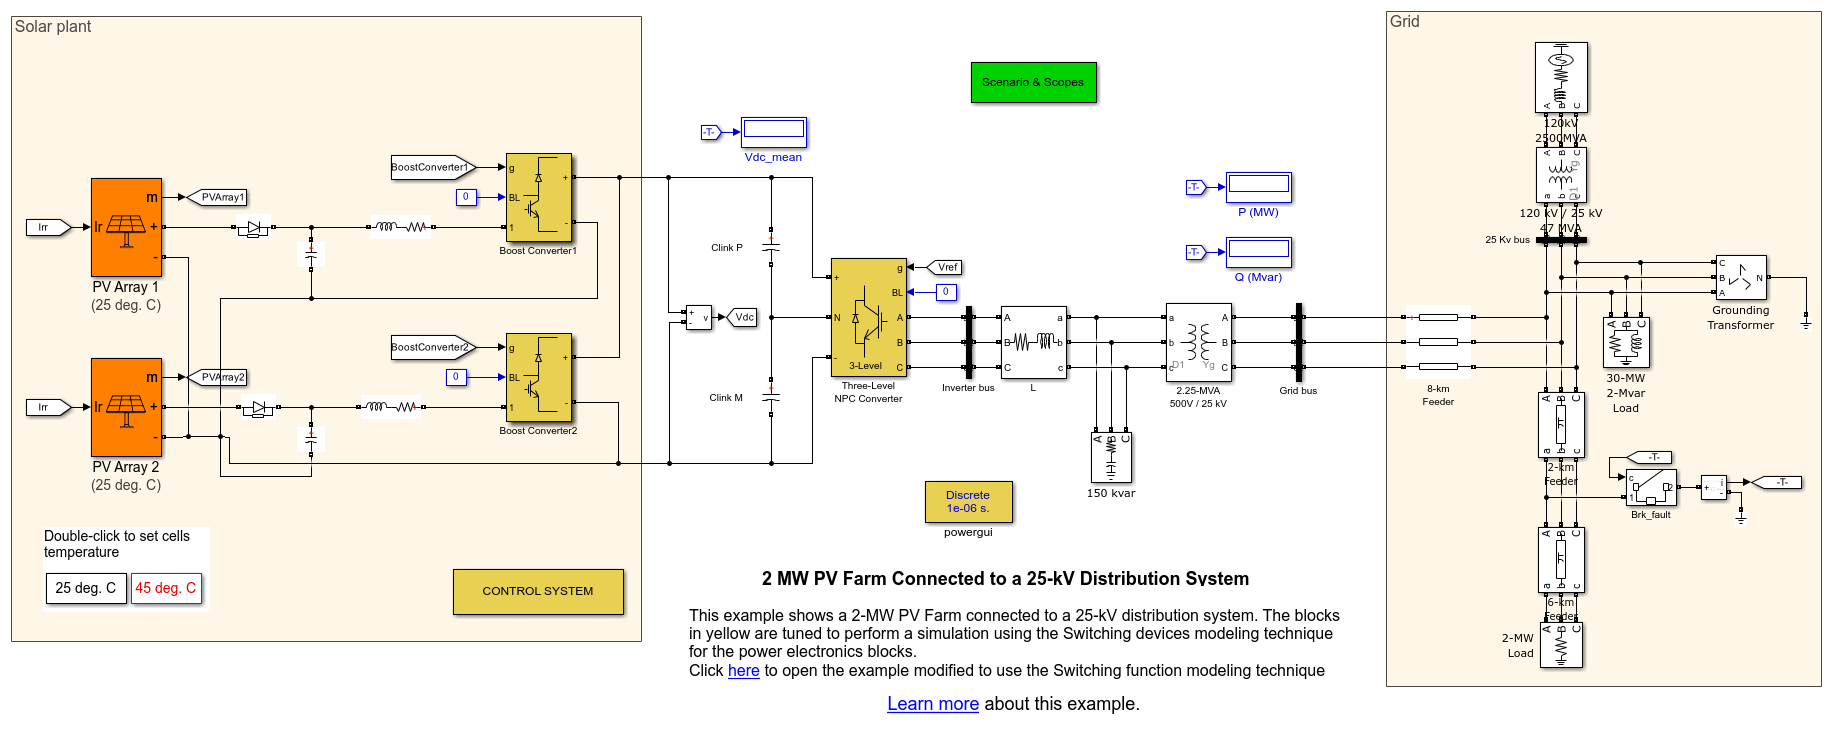 2-MW PV Farm Connected to a 25-kV Distribution System